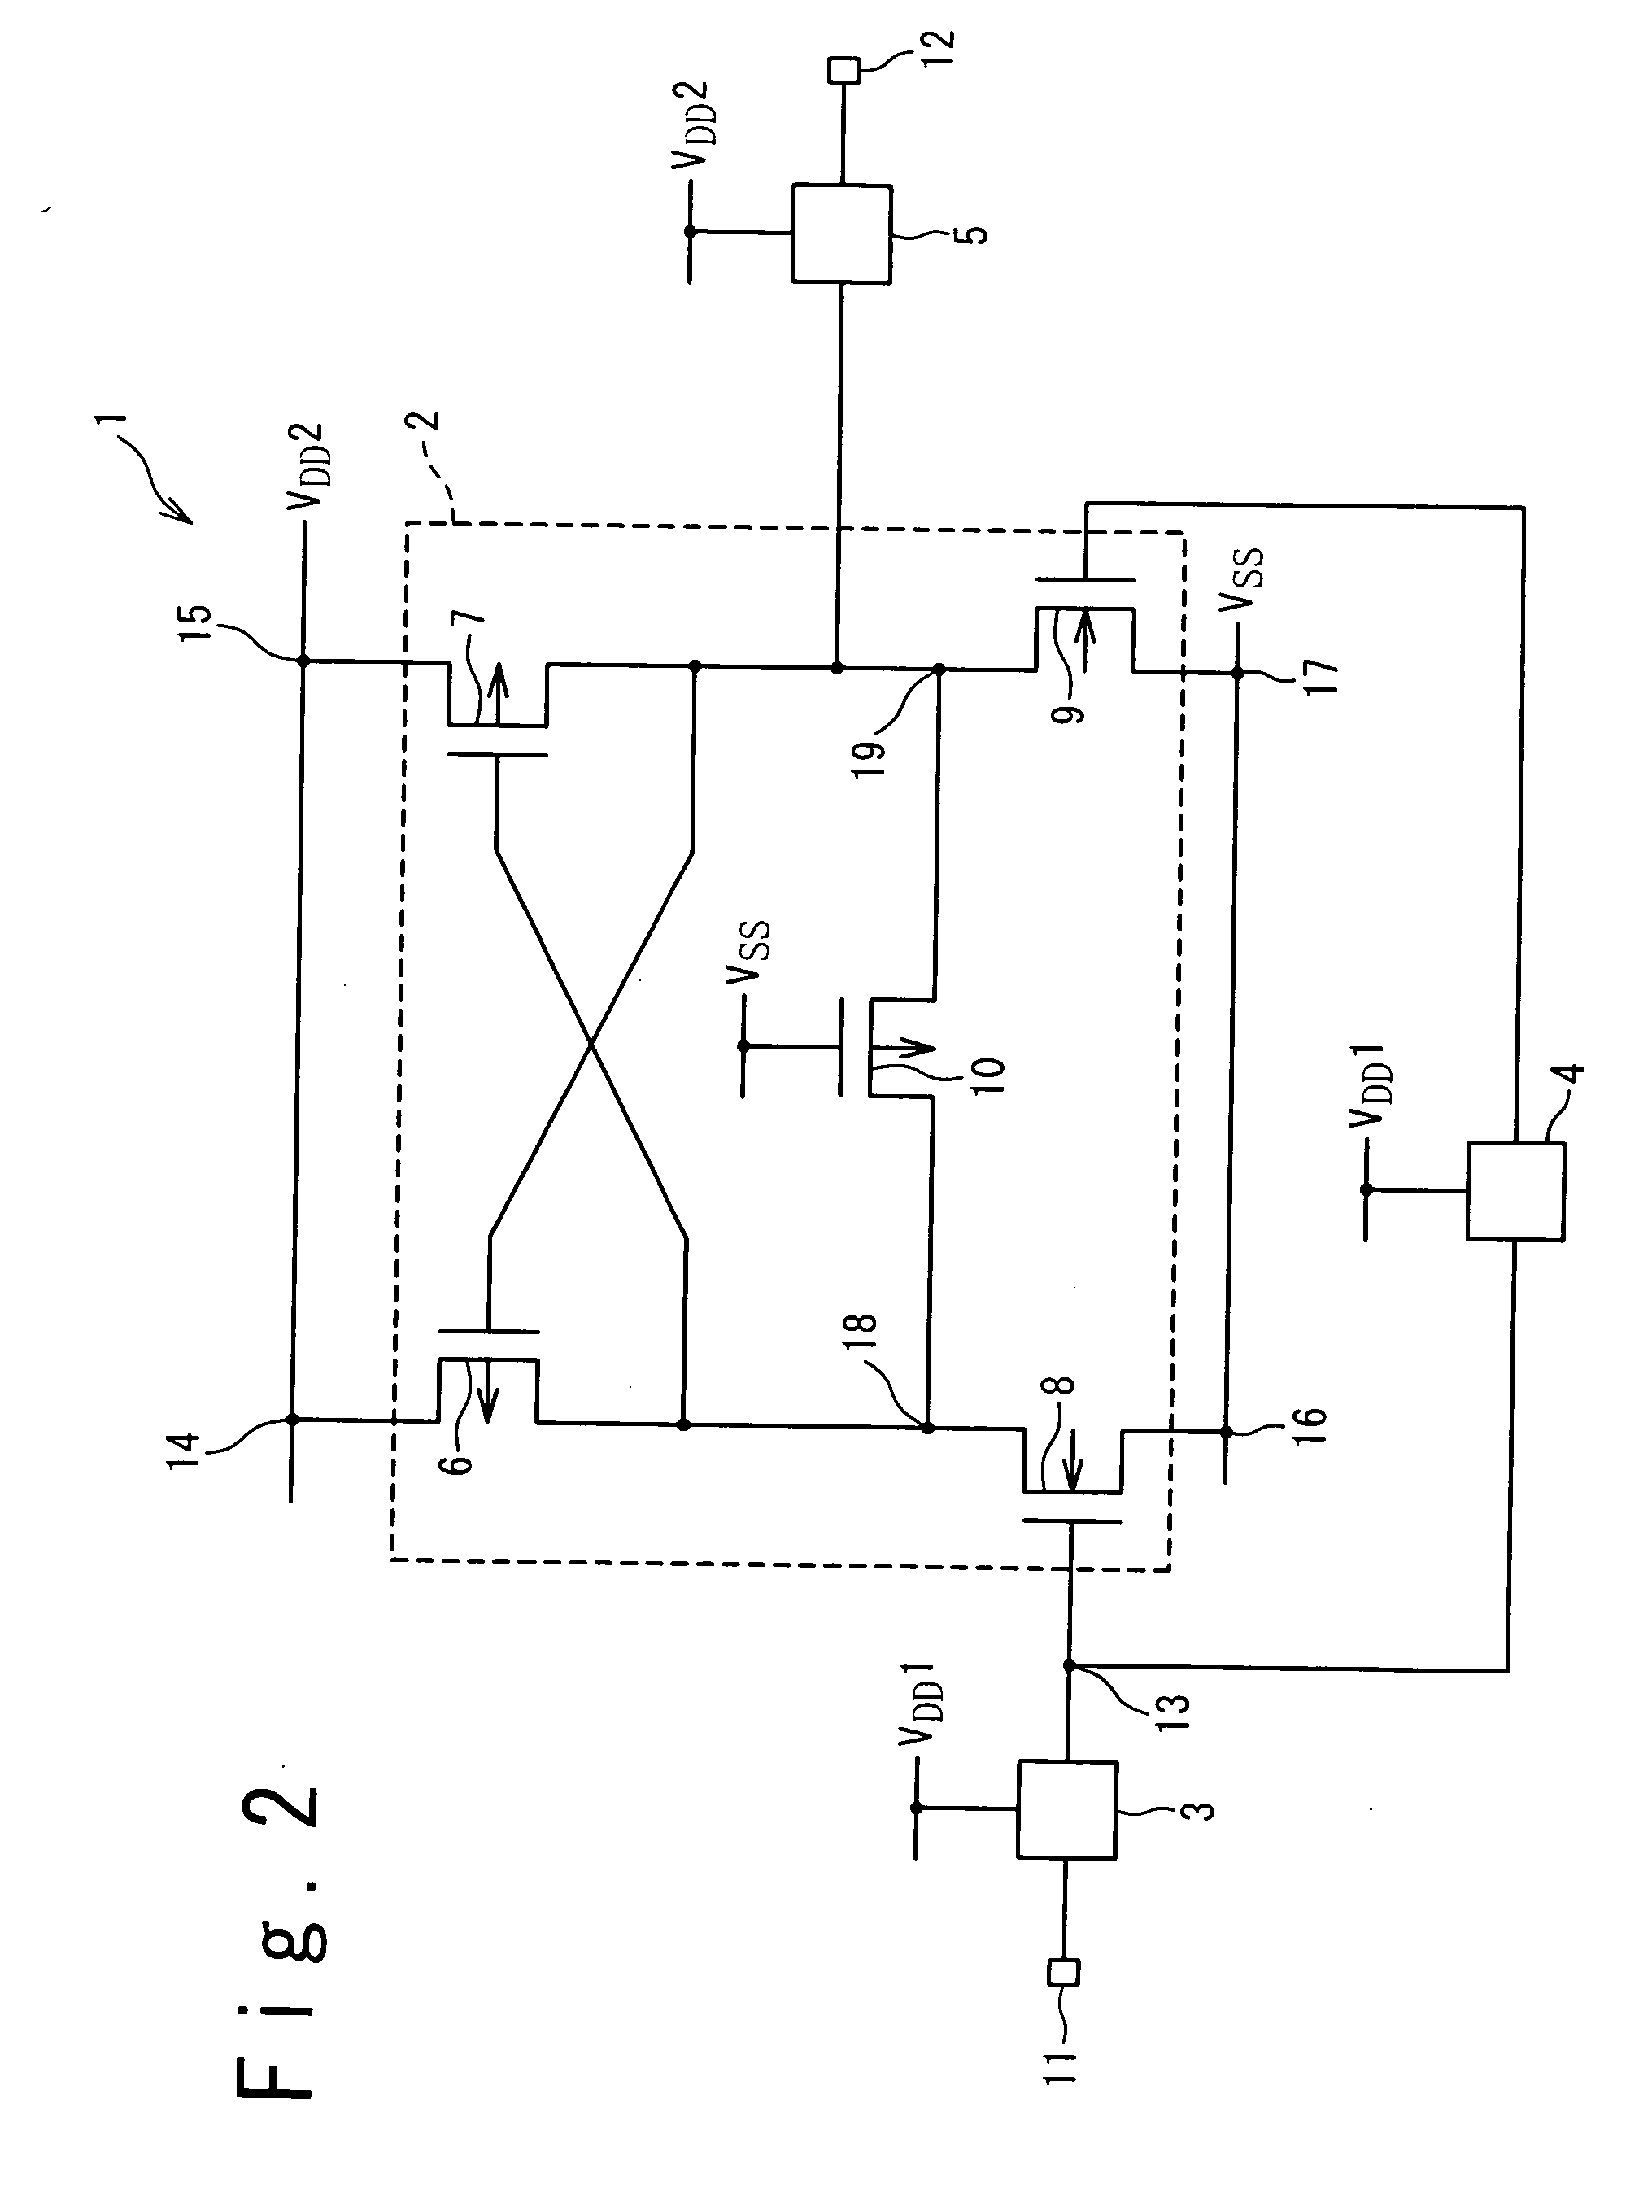 Level shifter circuit